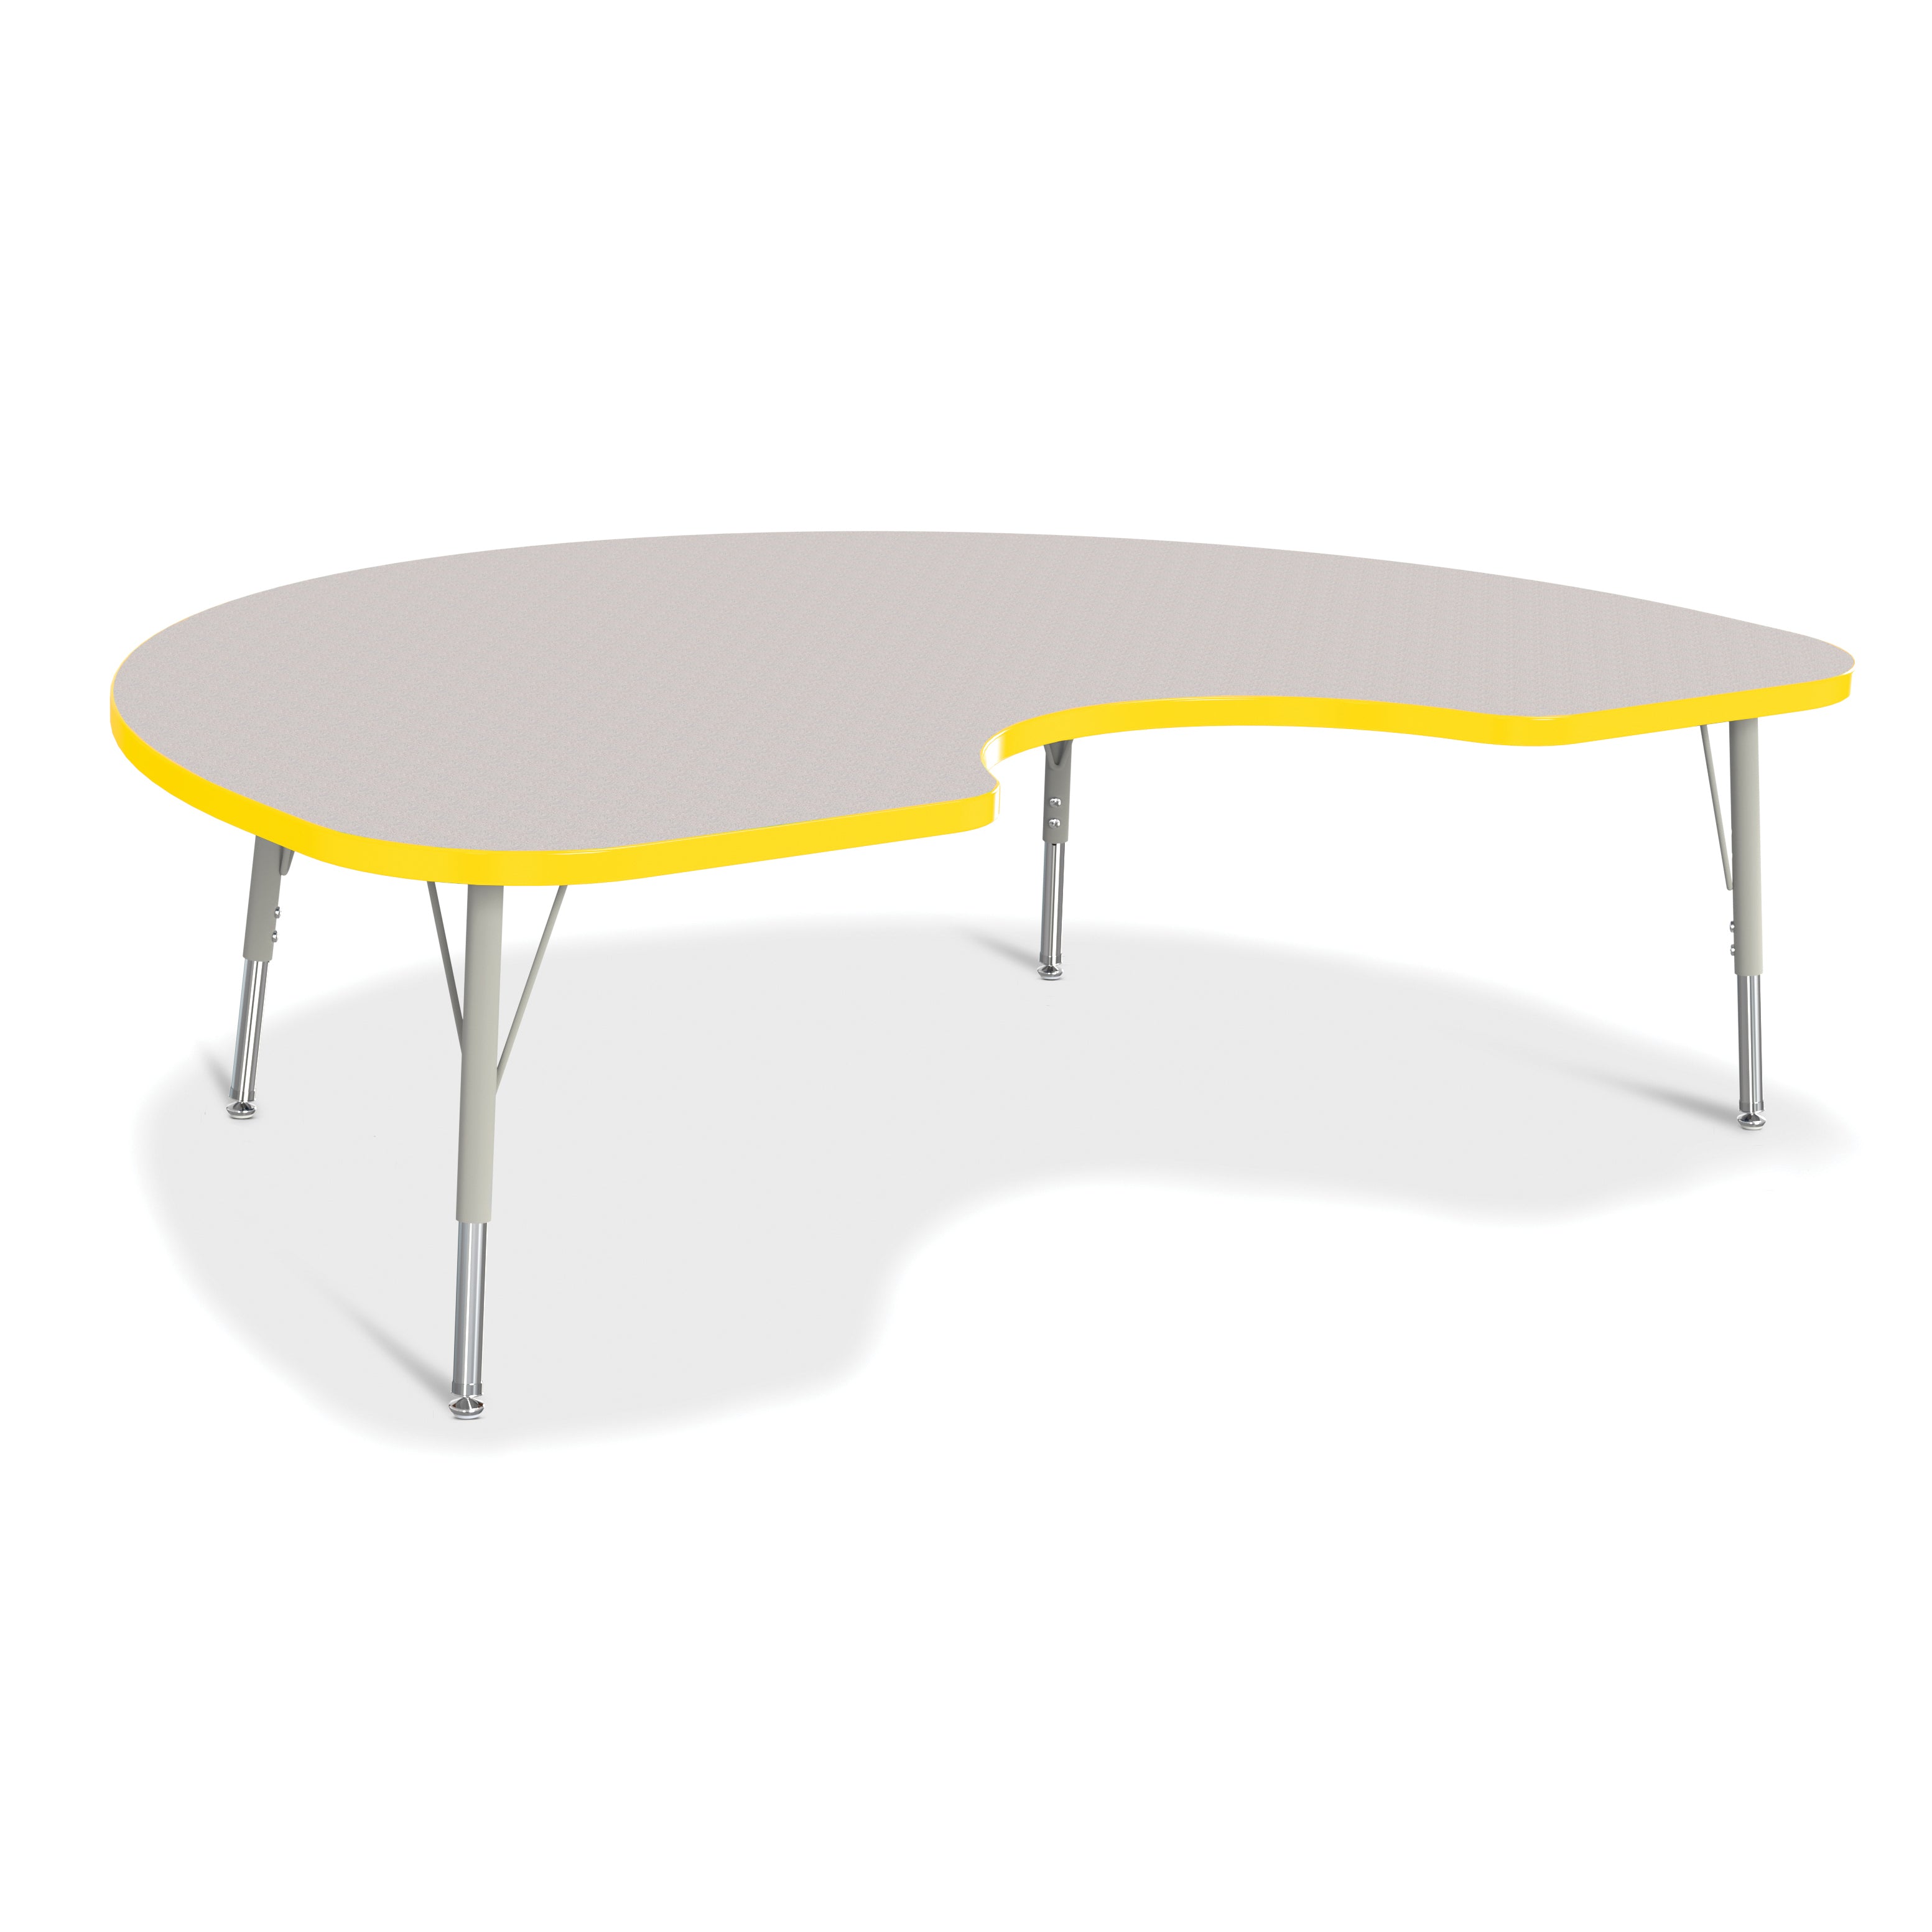 6423JCE007, Berries Kidney Activity Table - 48" X 72", E-height - Freckled Gray/Yellow/Gray